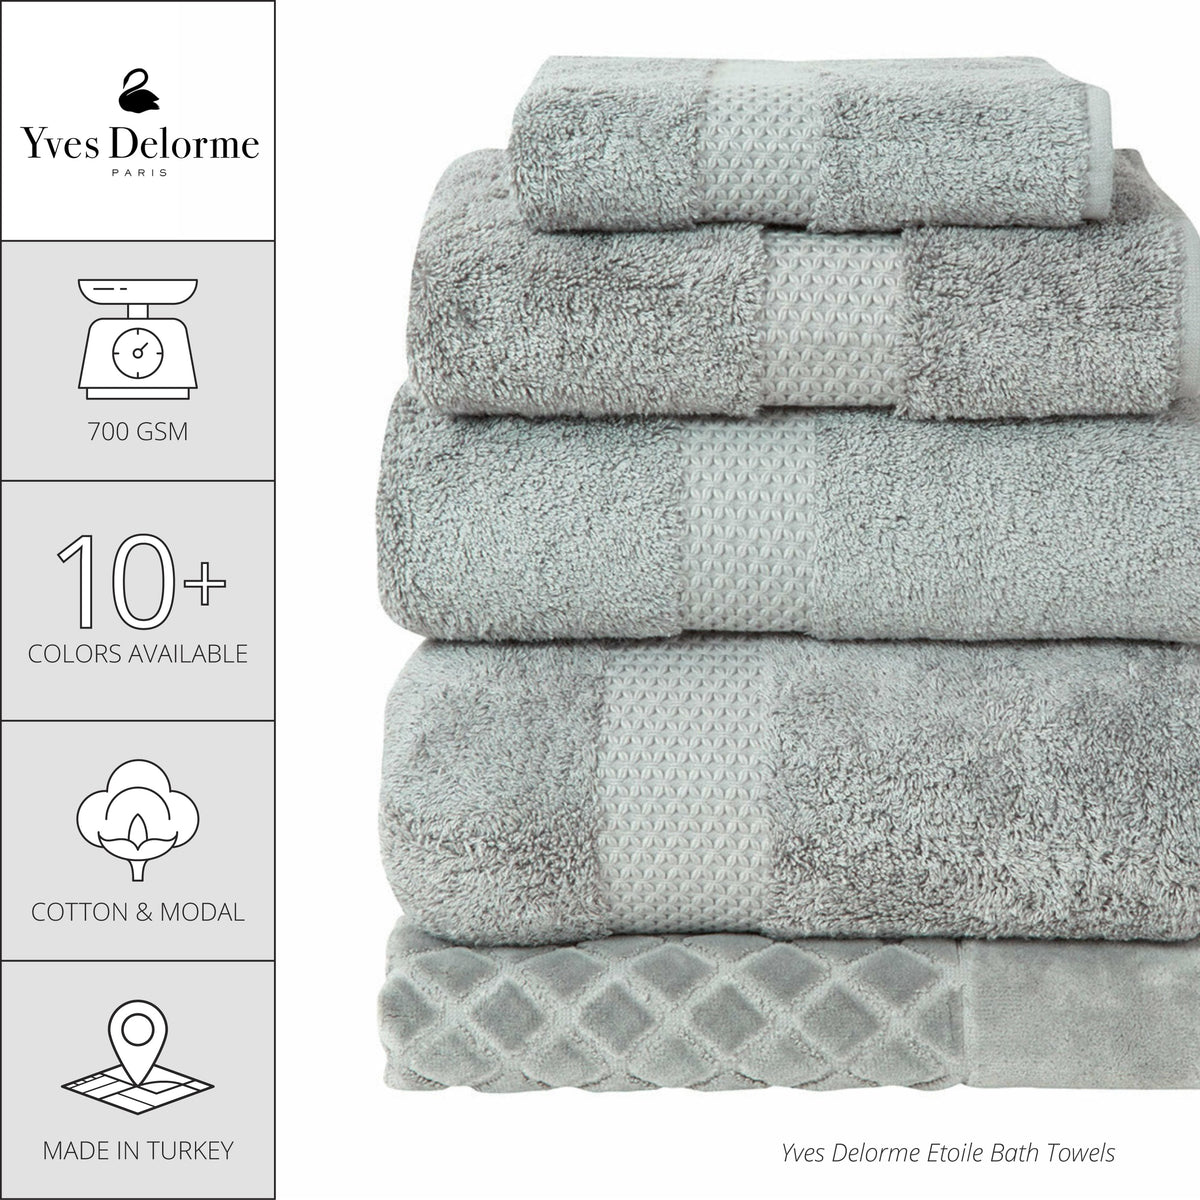 Yves Delorme Etoile Bath Towels and Mats - Blush